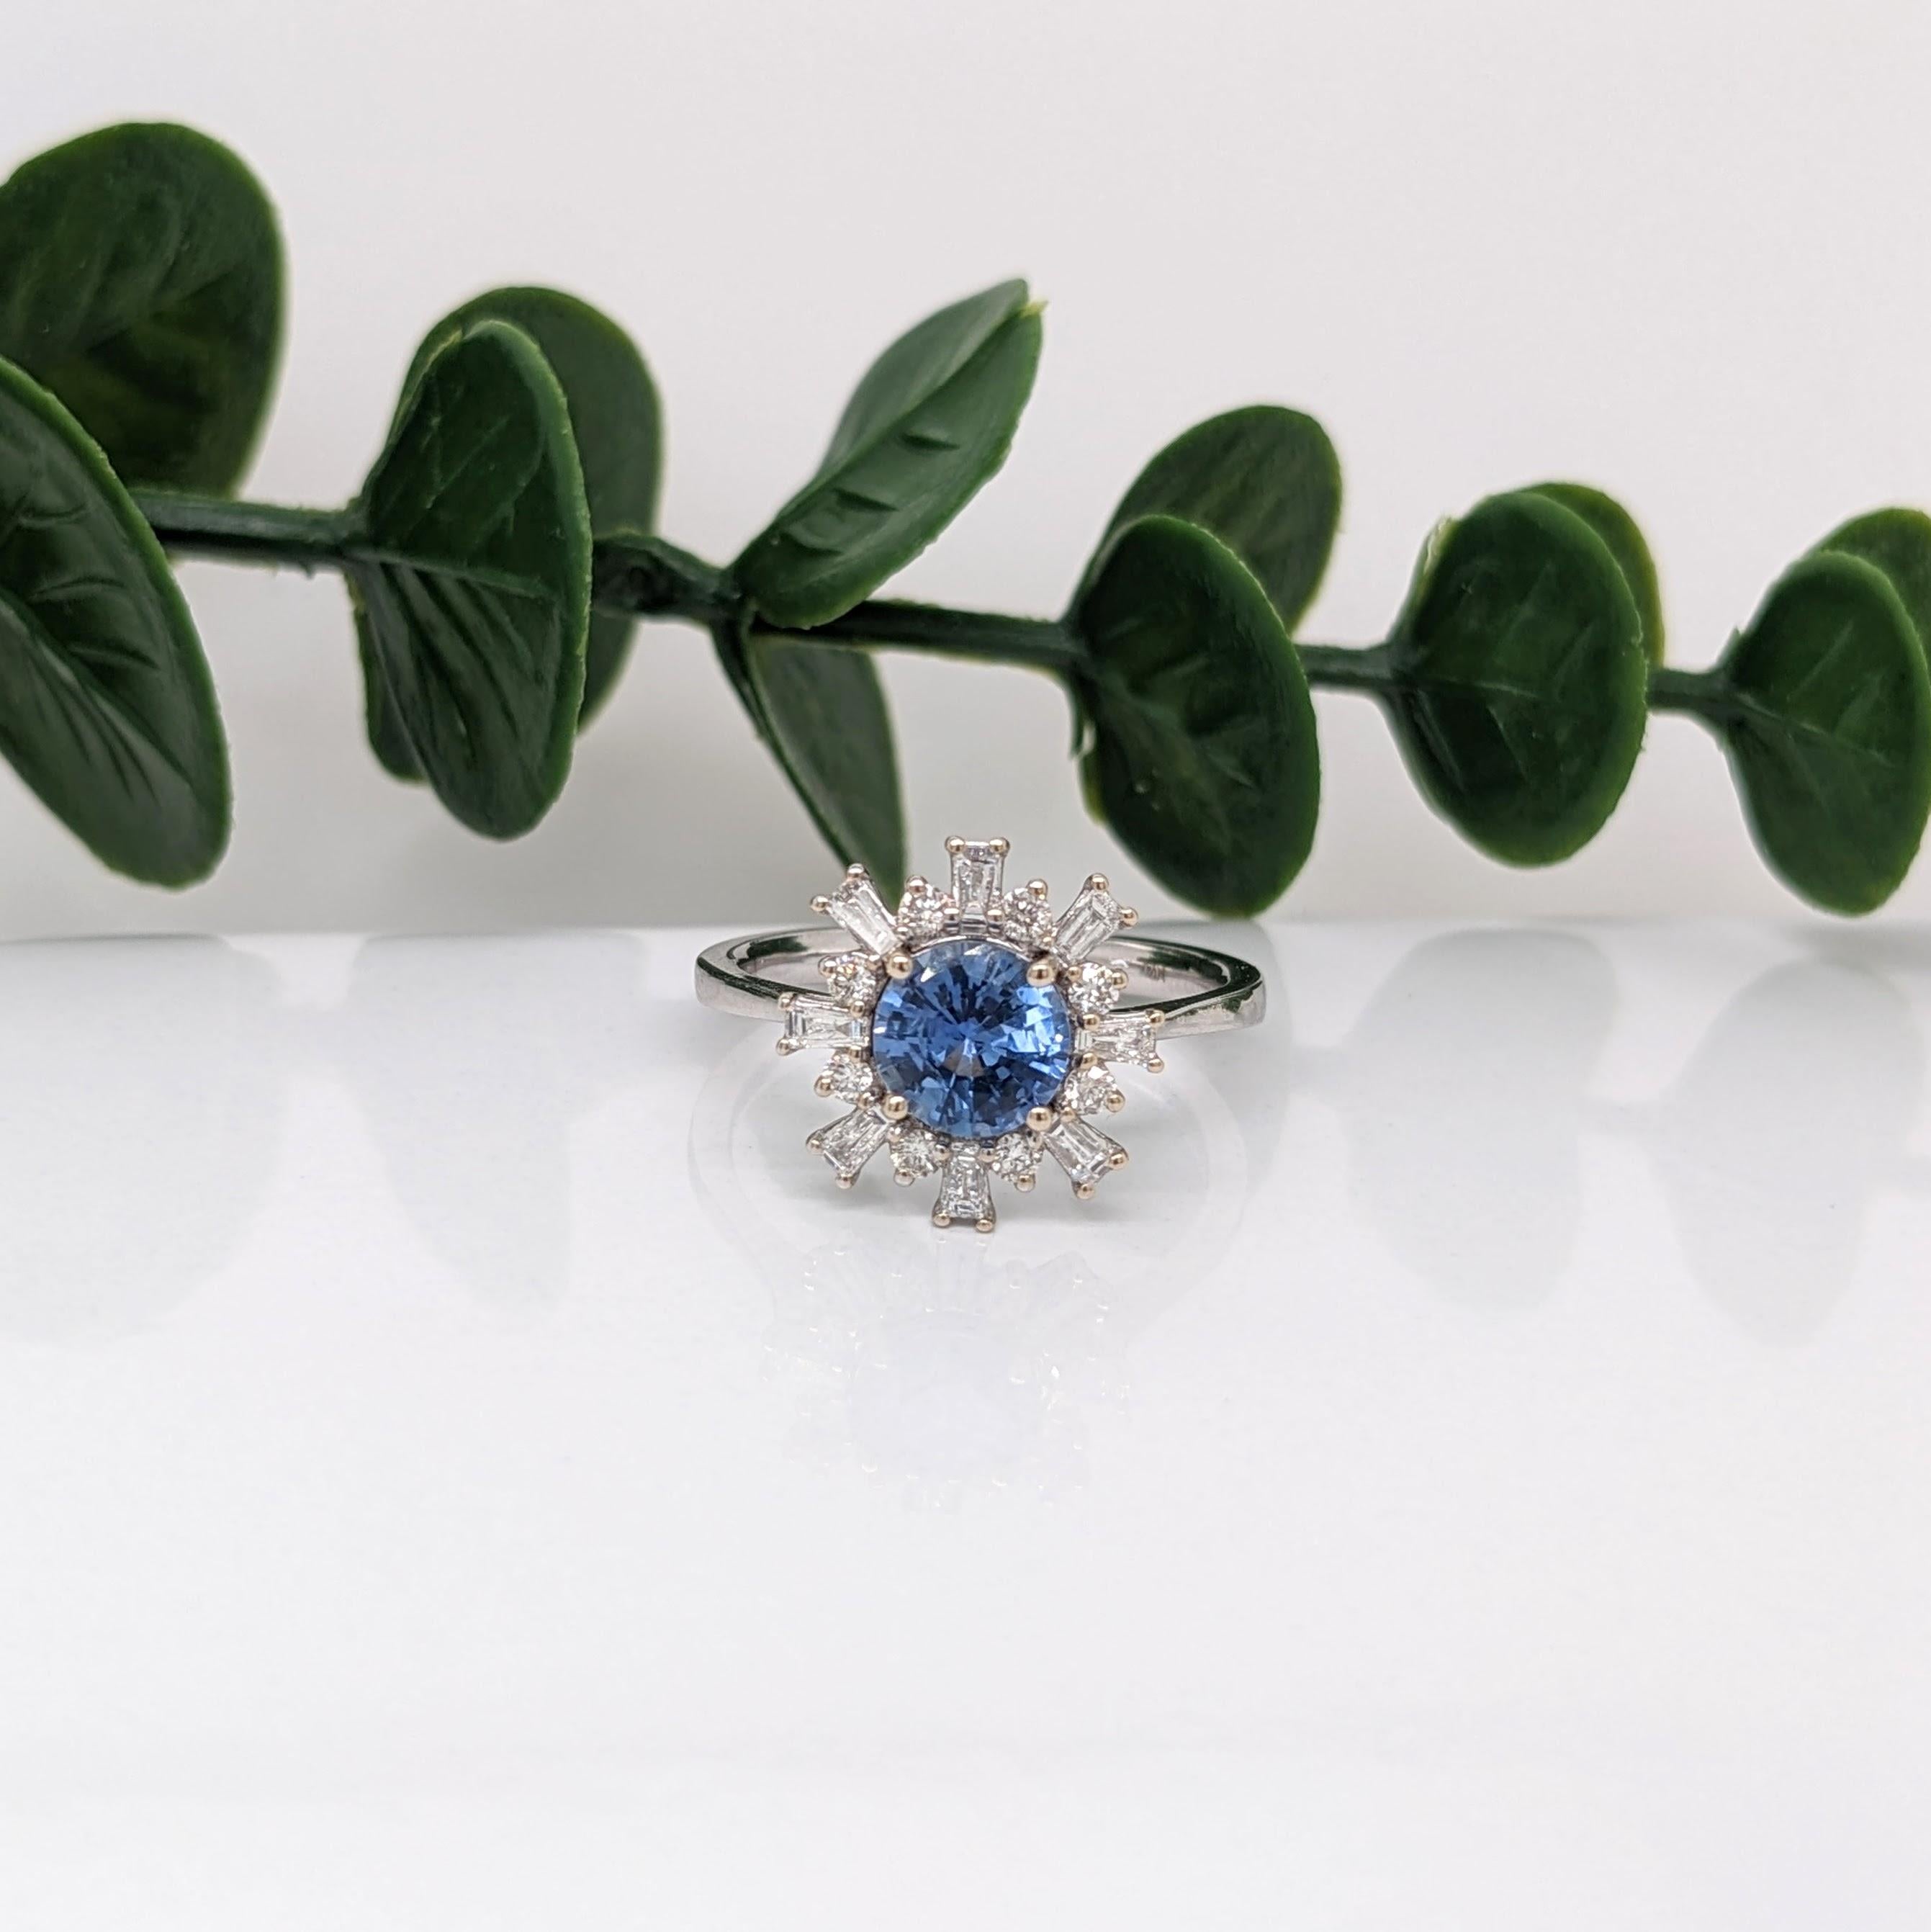 This sparkling white and blue ring is perfect for the modern bride or for 5th and 45th anniversaries! It is also a great statement piece for the holidays coming up. with it's snowflake inspired halo! With a tapered band you can ensure that this ring